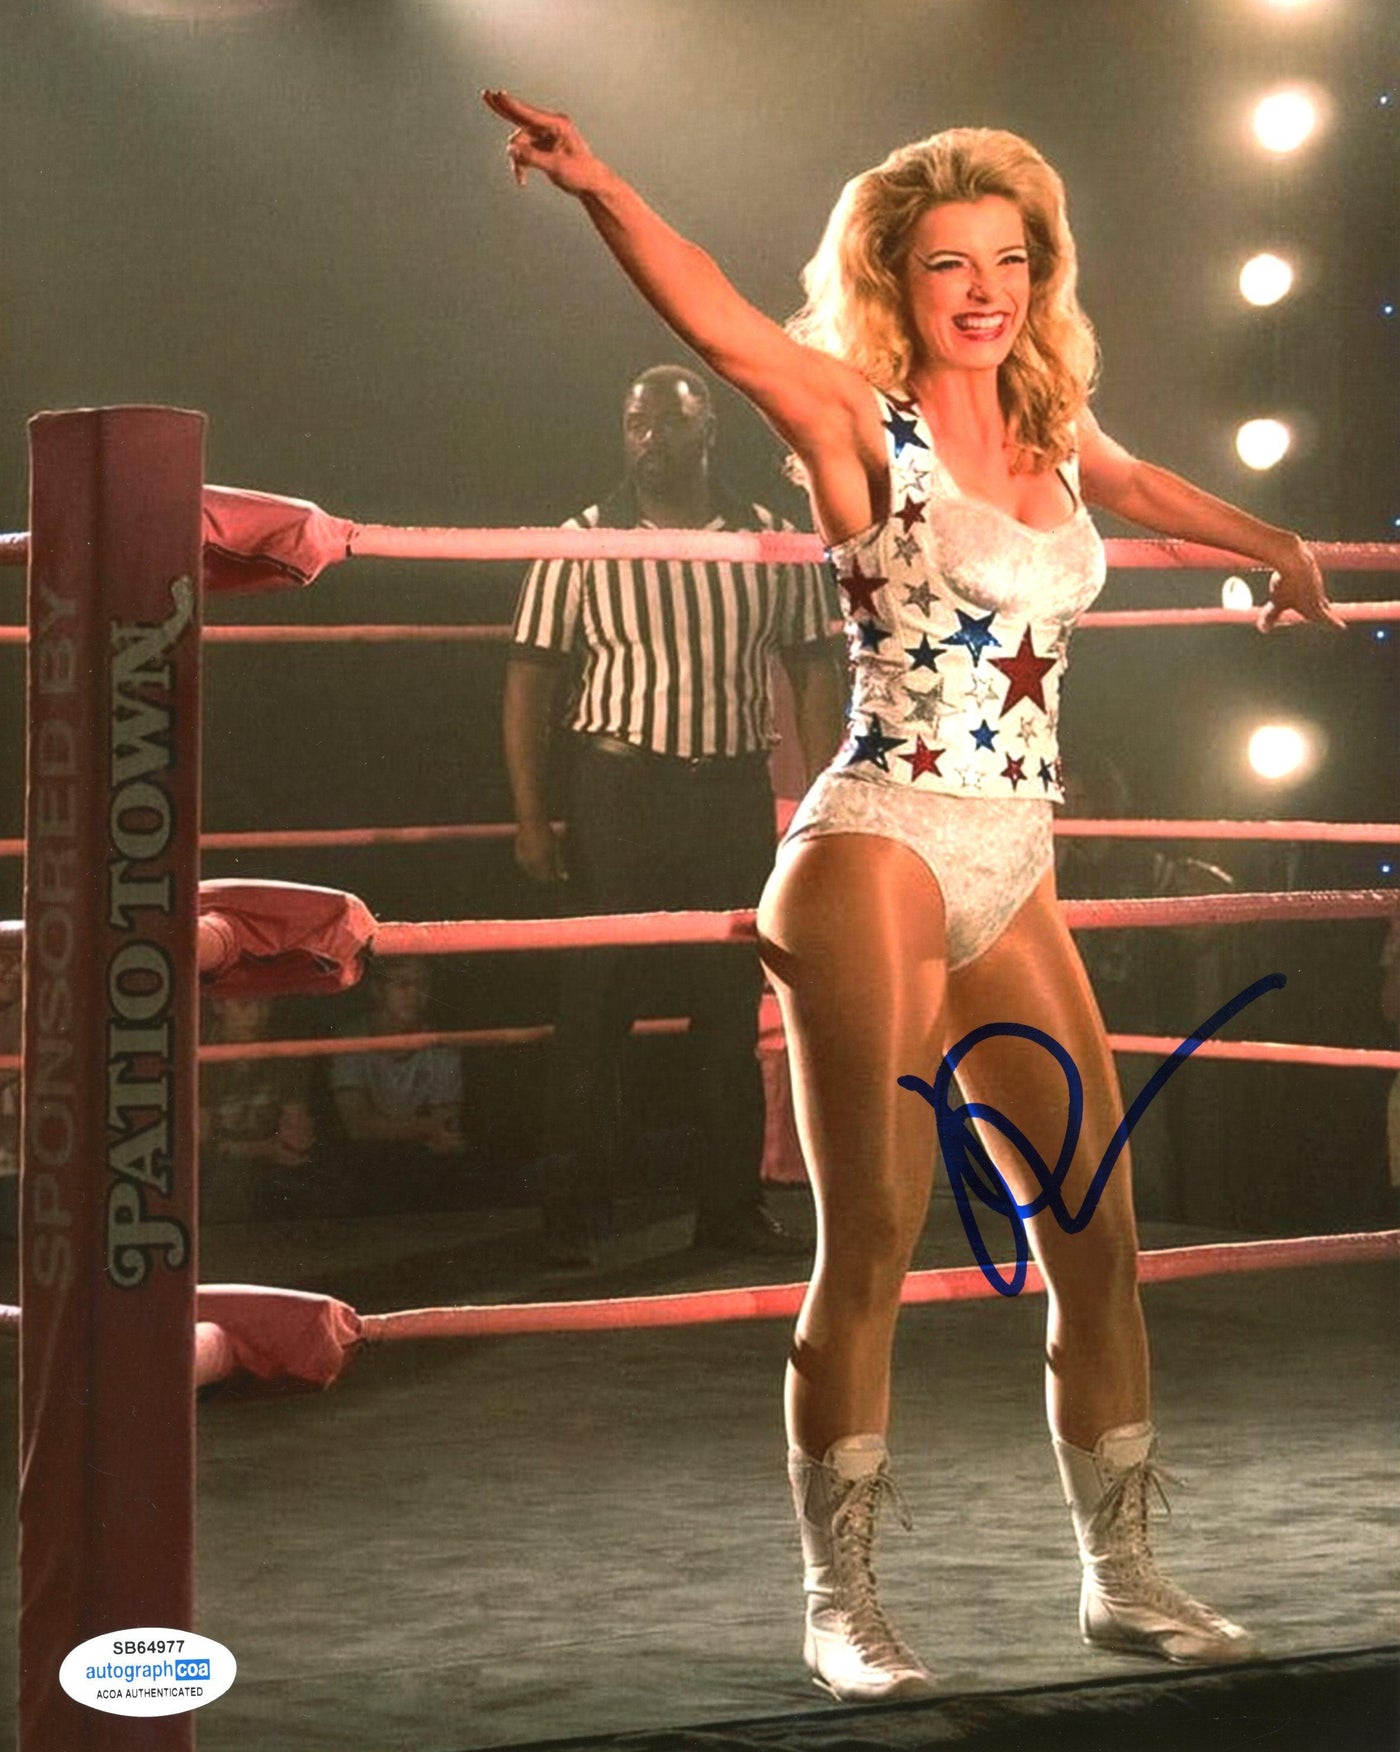 Betty Gilpin Signed 8x10 Photo Glow Debbie Eagan Autographed ACOA